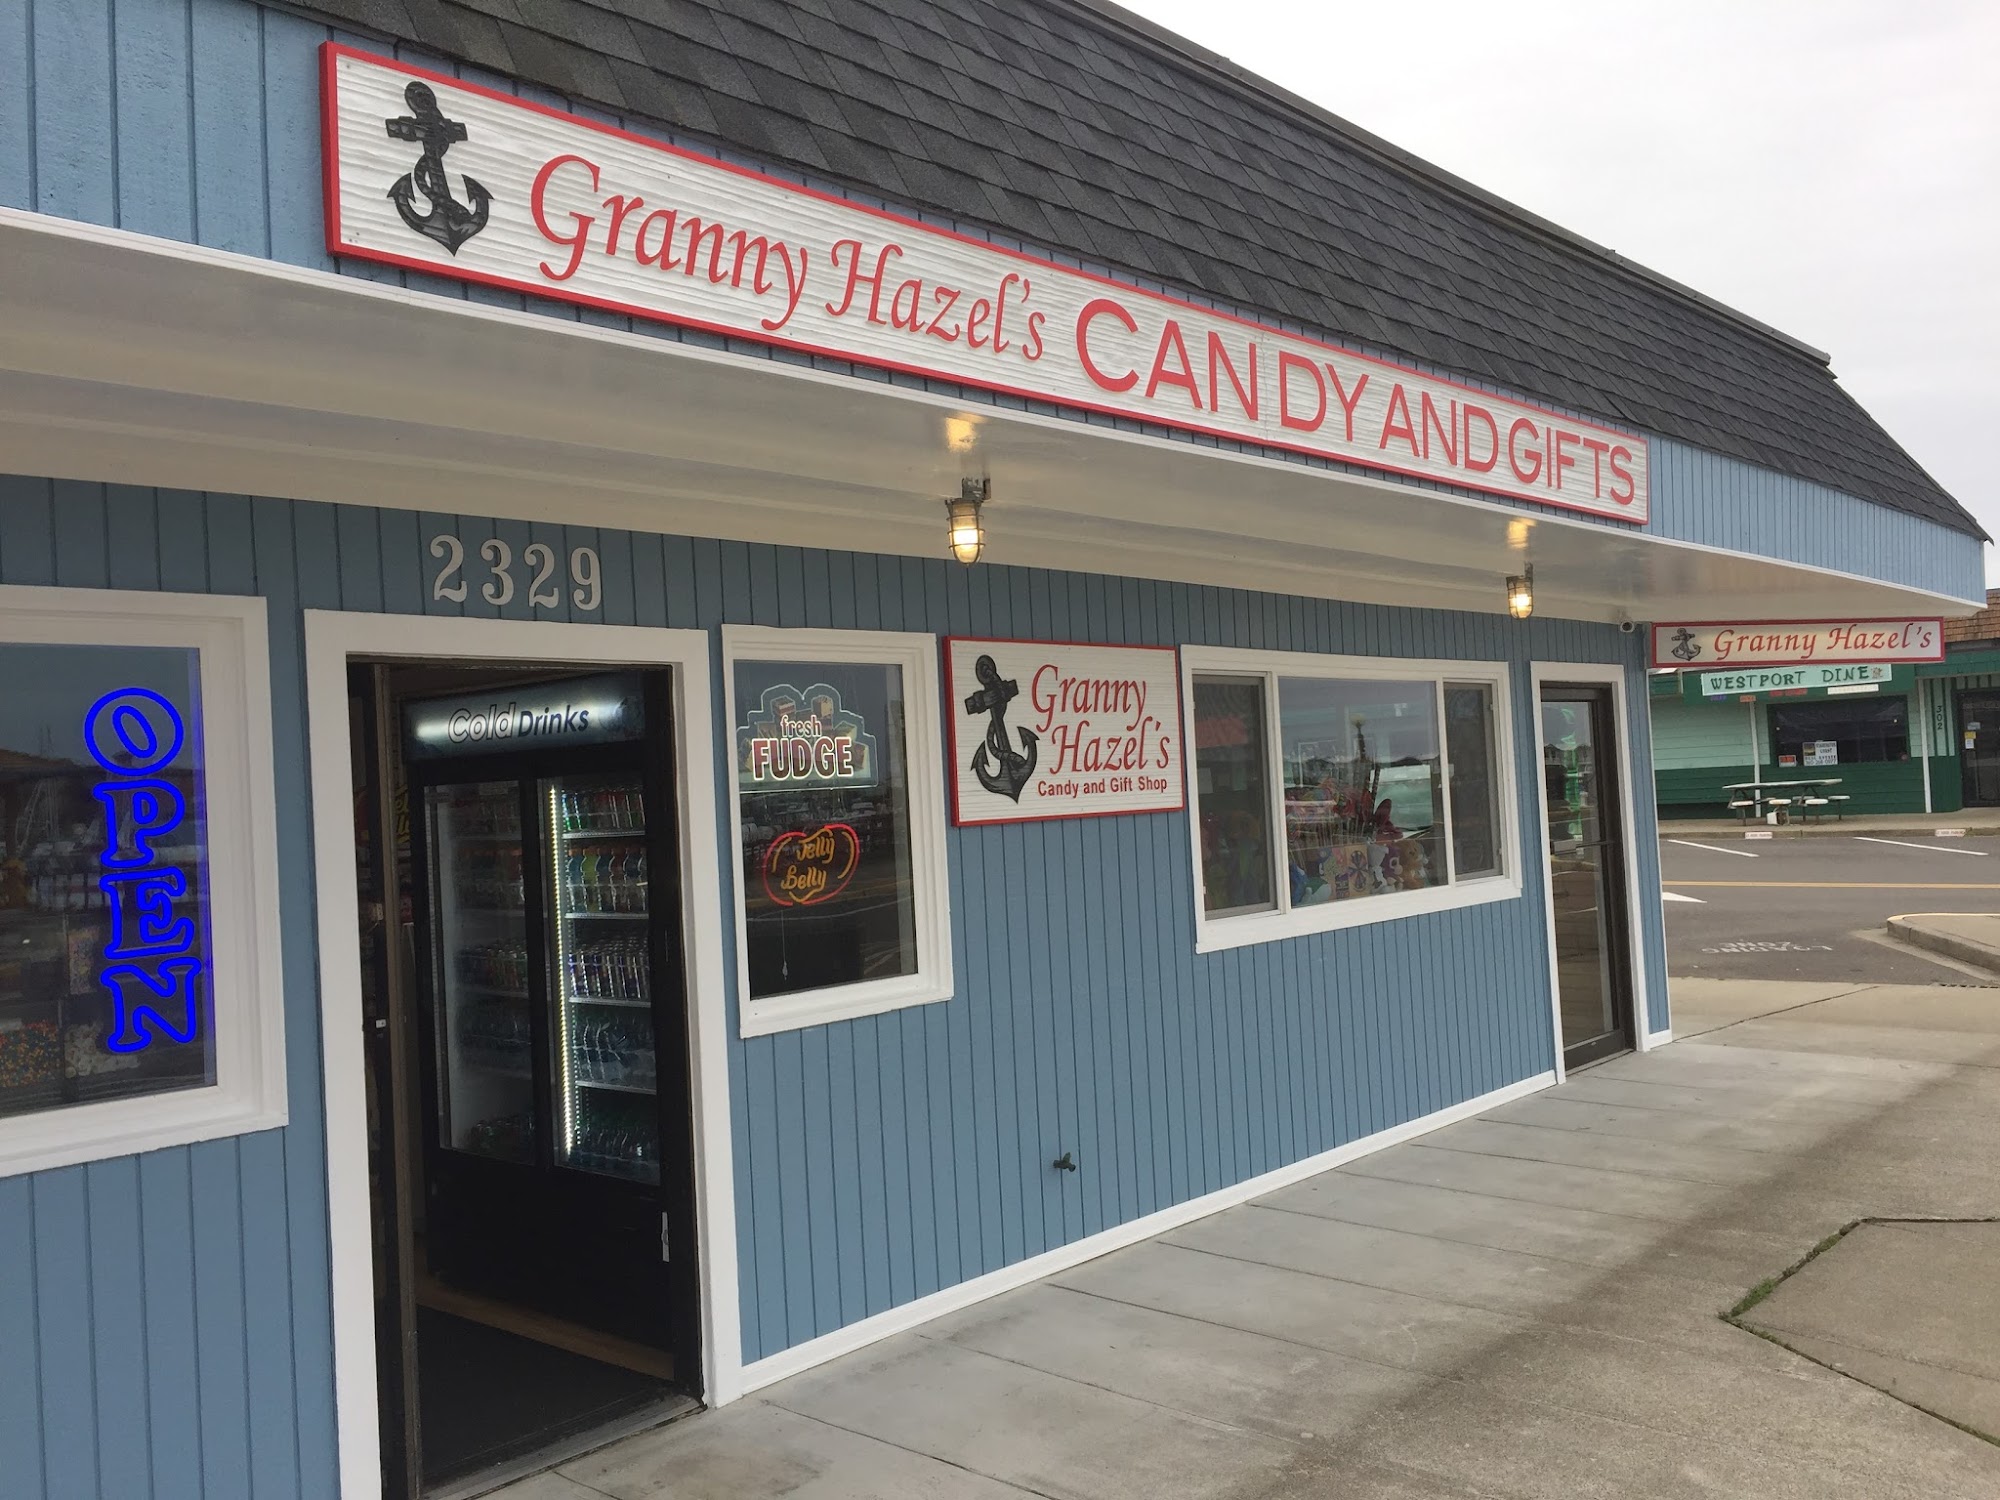 Granny Hazel's Candy and Gifts